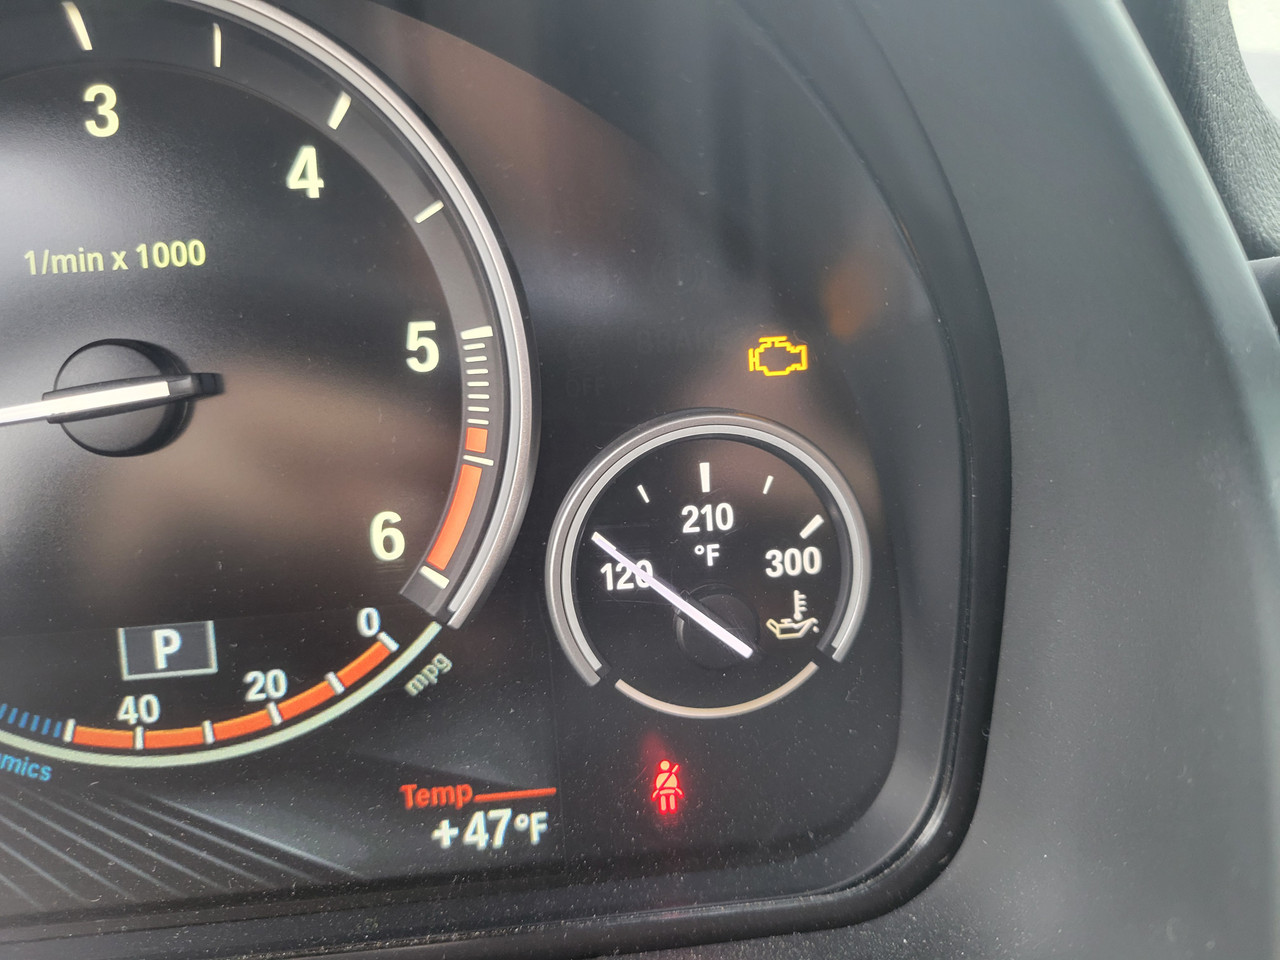 2014 BMW X5 with an engine code